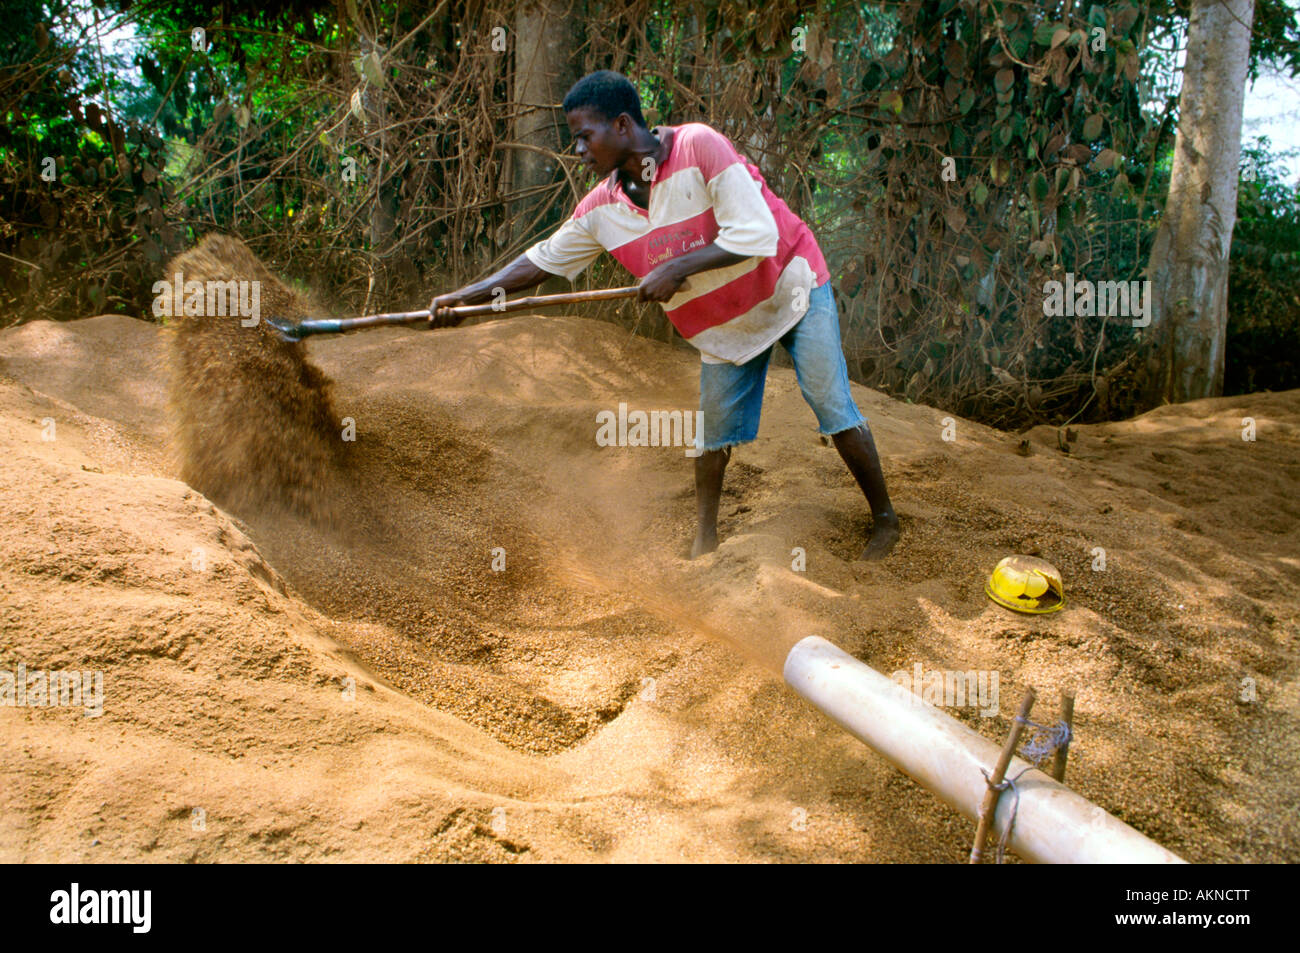 Workers tend to a machine that removes the husk on cocoa beans in Cote d'Ivoire Stock Photo